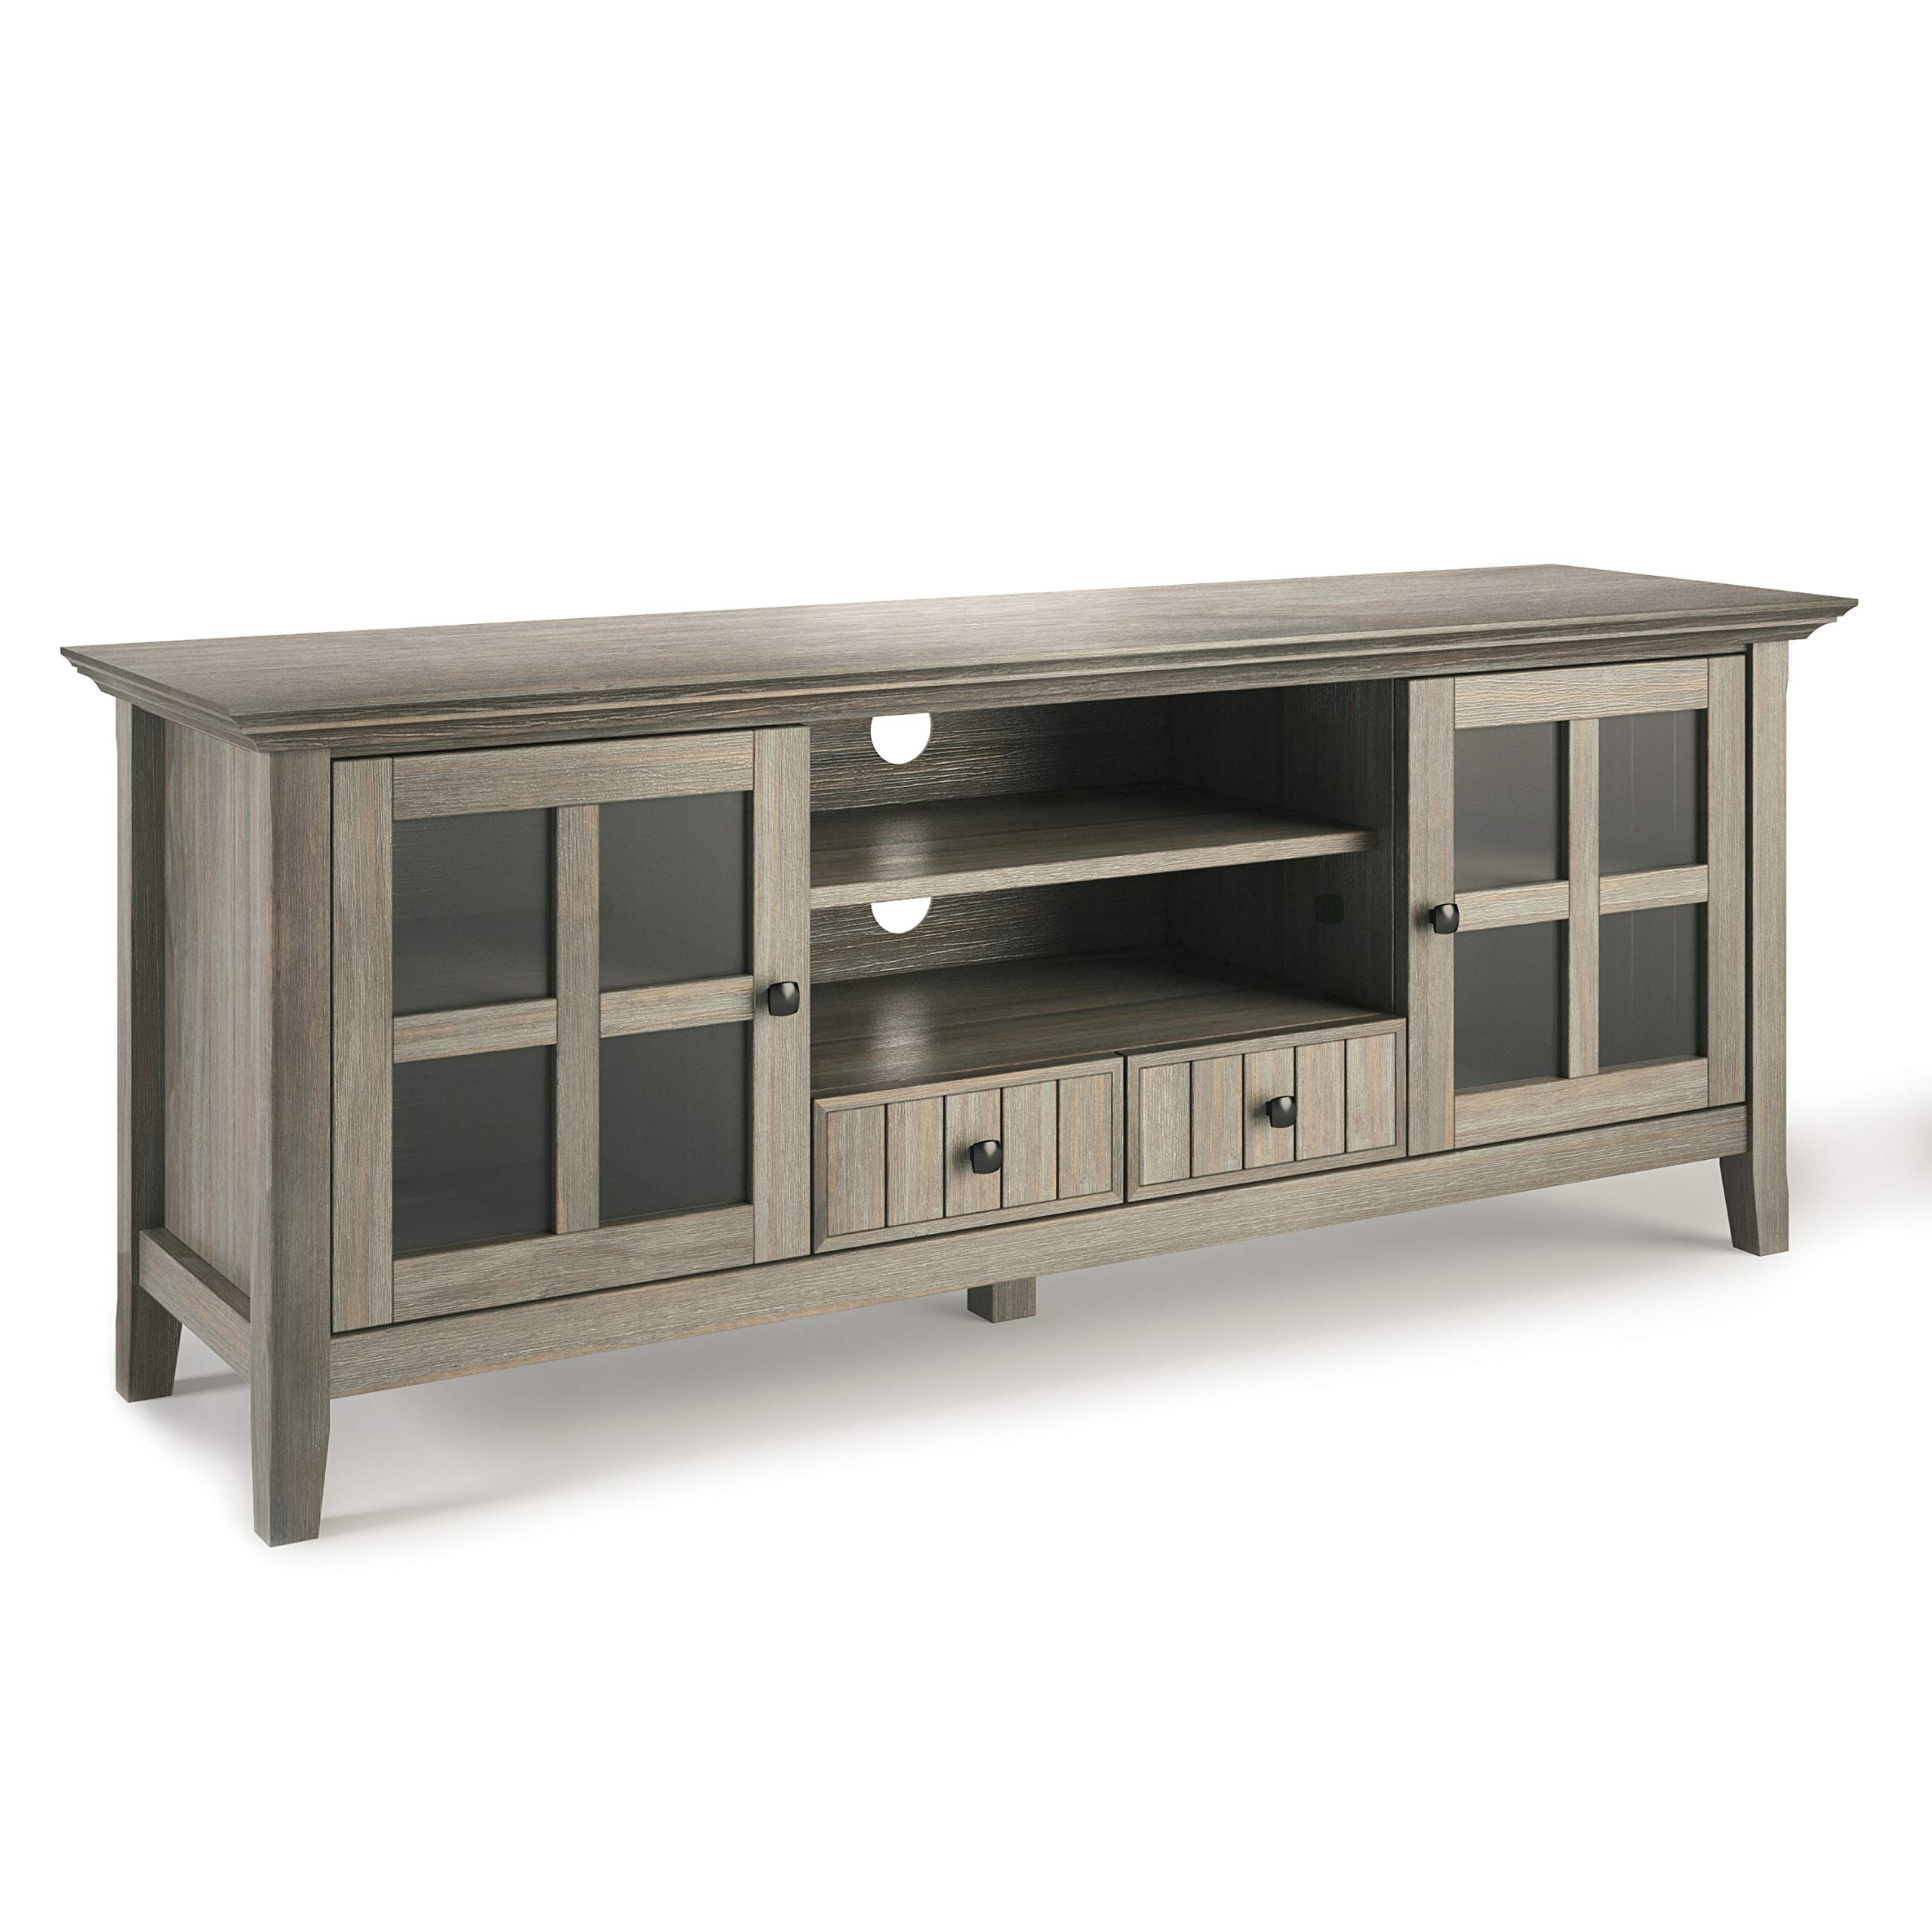 Simpli Home Acadian SOLID WOOD 60 inch Wide Transitional TV Media Stand in Distressed Grey For TVs up to 65 inches